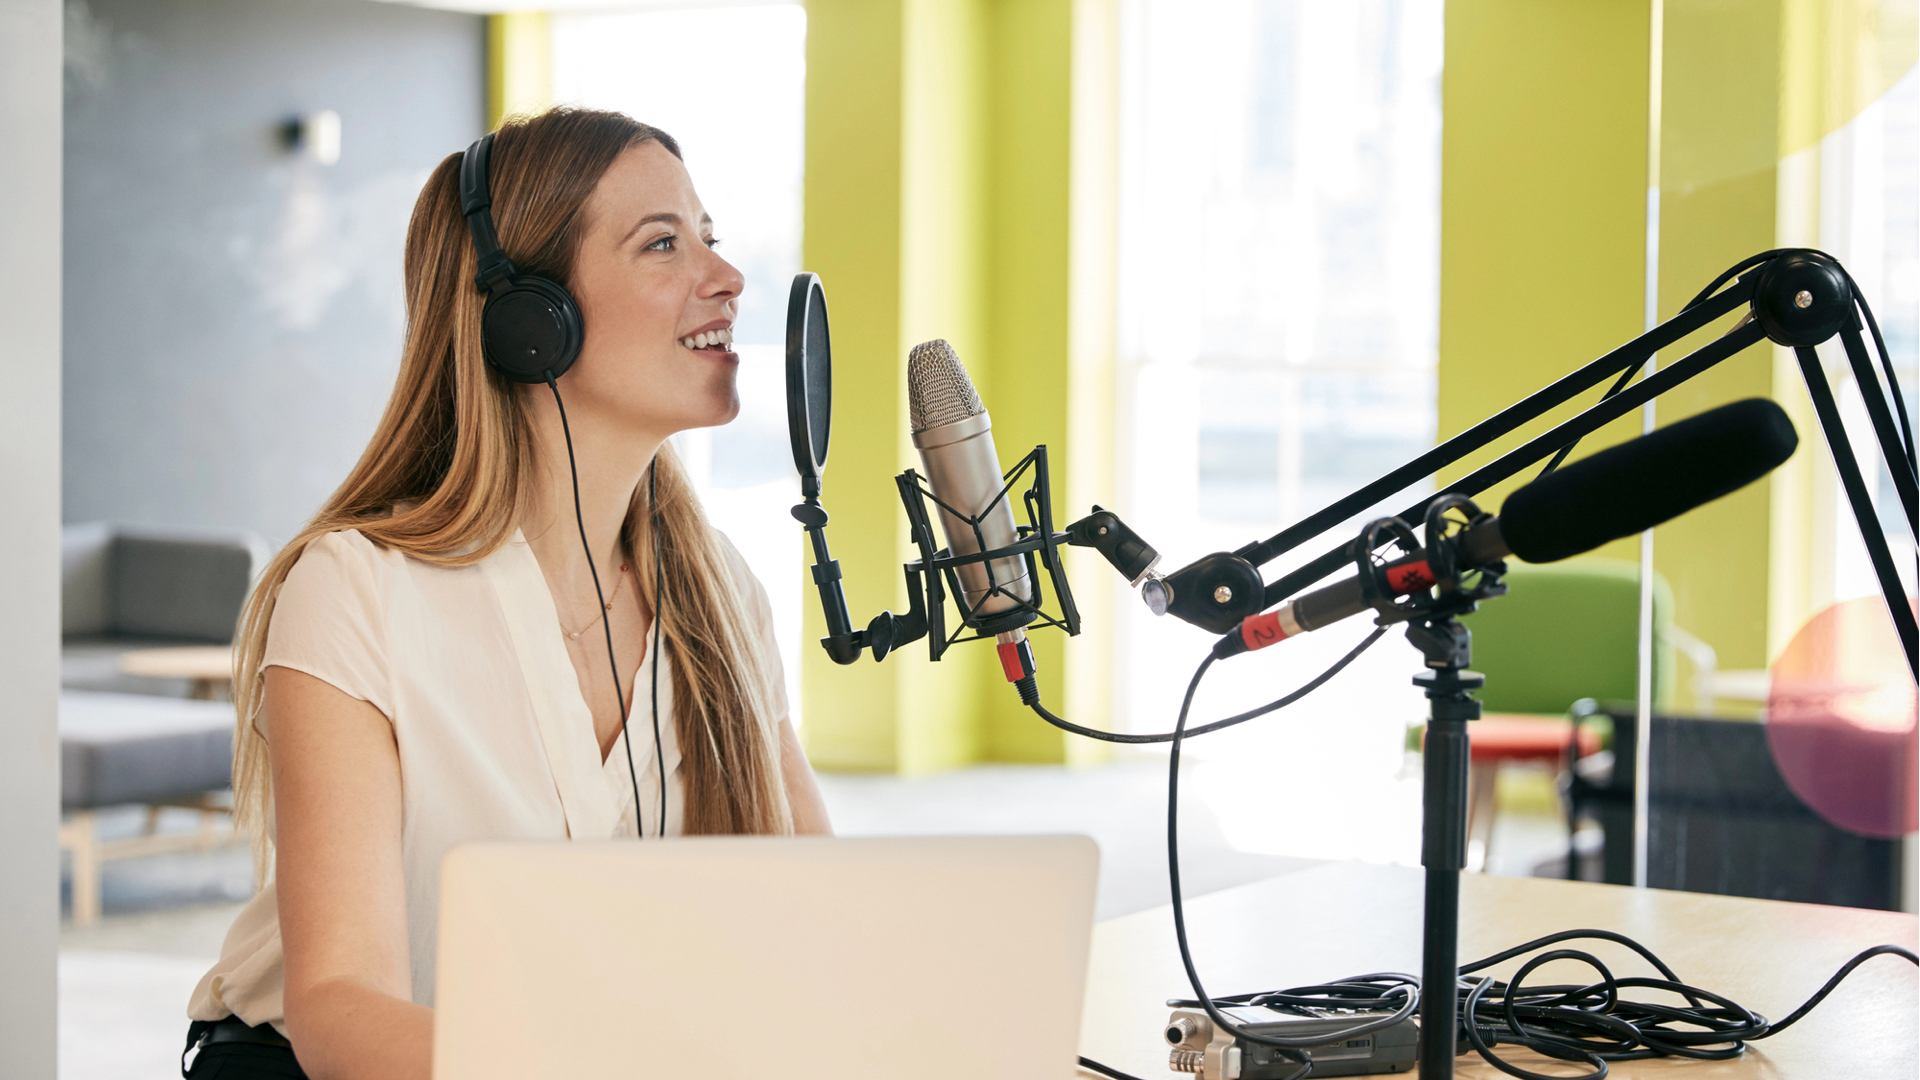 <p>Podcasting is about creating audio shows on topics you love. Record episodes, edit them, and share your podcast on Spotify, Apple Podcasts, or Anchor.</p><p>With interesting content, you can grow an audience and make money through ads and sponsorships. It’s fun to share your voice, connect with others, and potentially earn from your passion.</p>